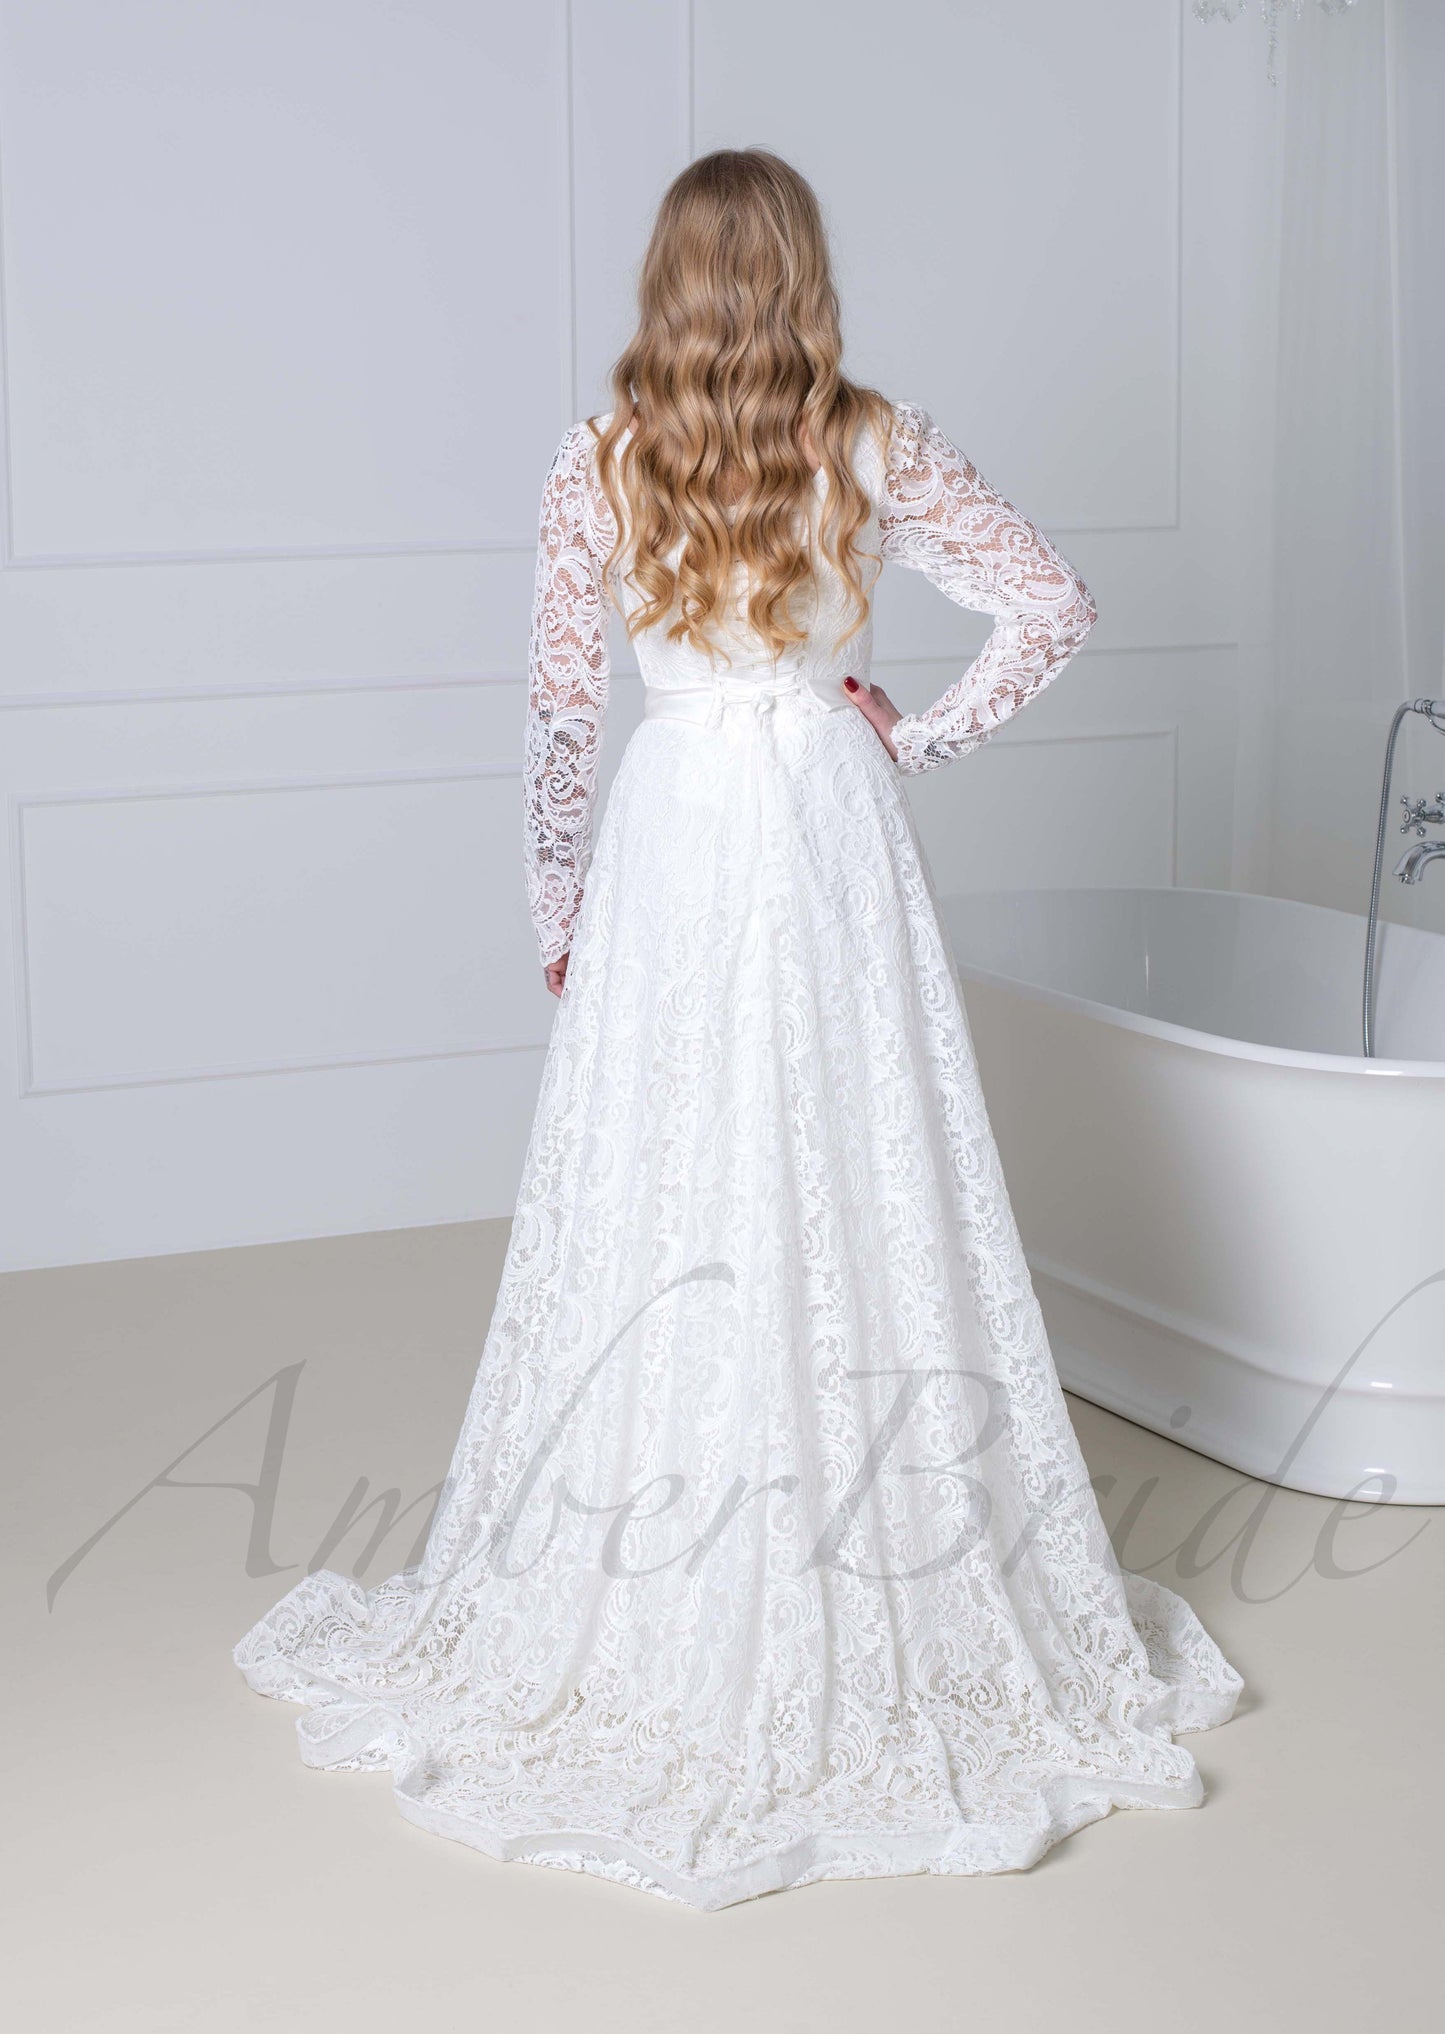 Boho A Line All Lace Wedding Dress with Long Sleeve and Square Neck